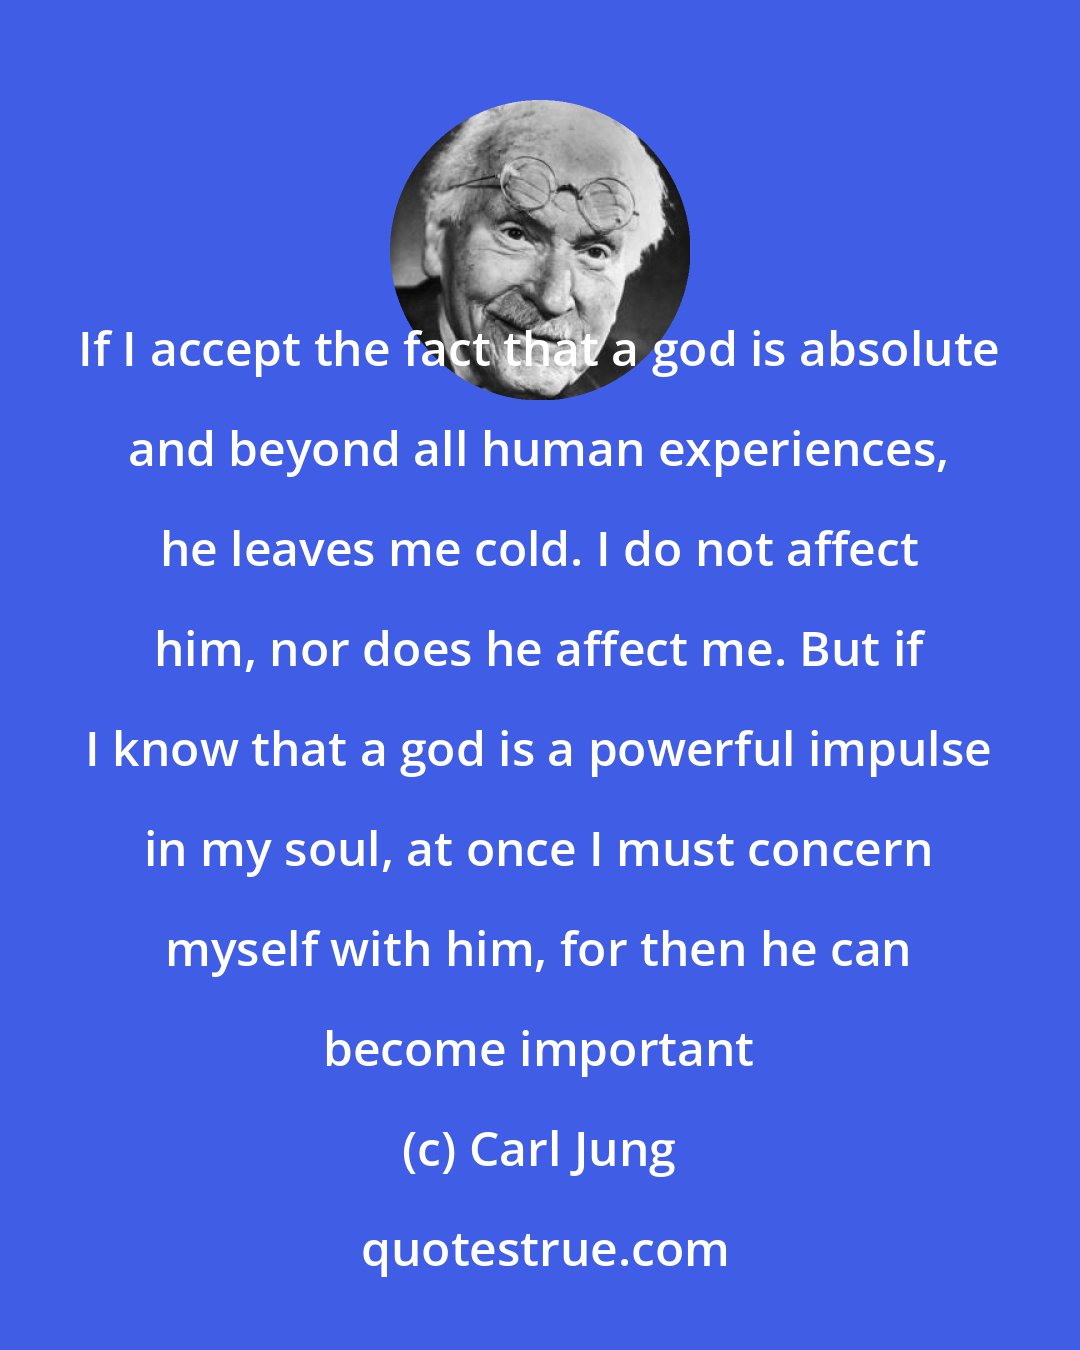 Carl Jung: If I accept the fact that a god is absolute and beyond all human experiences, he leaves me cold. I do not affect him, nor does he affect me. But if I know that a god is a powerful impulse in my soul, at once I must concern myself with him, for then he can become important